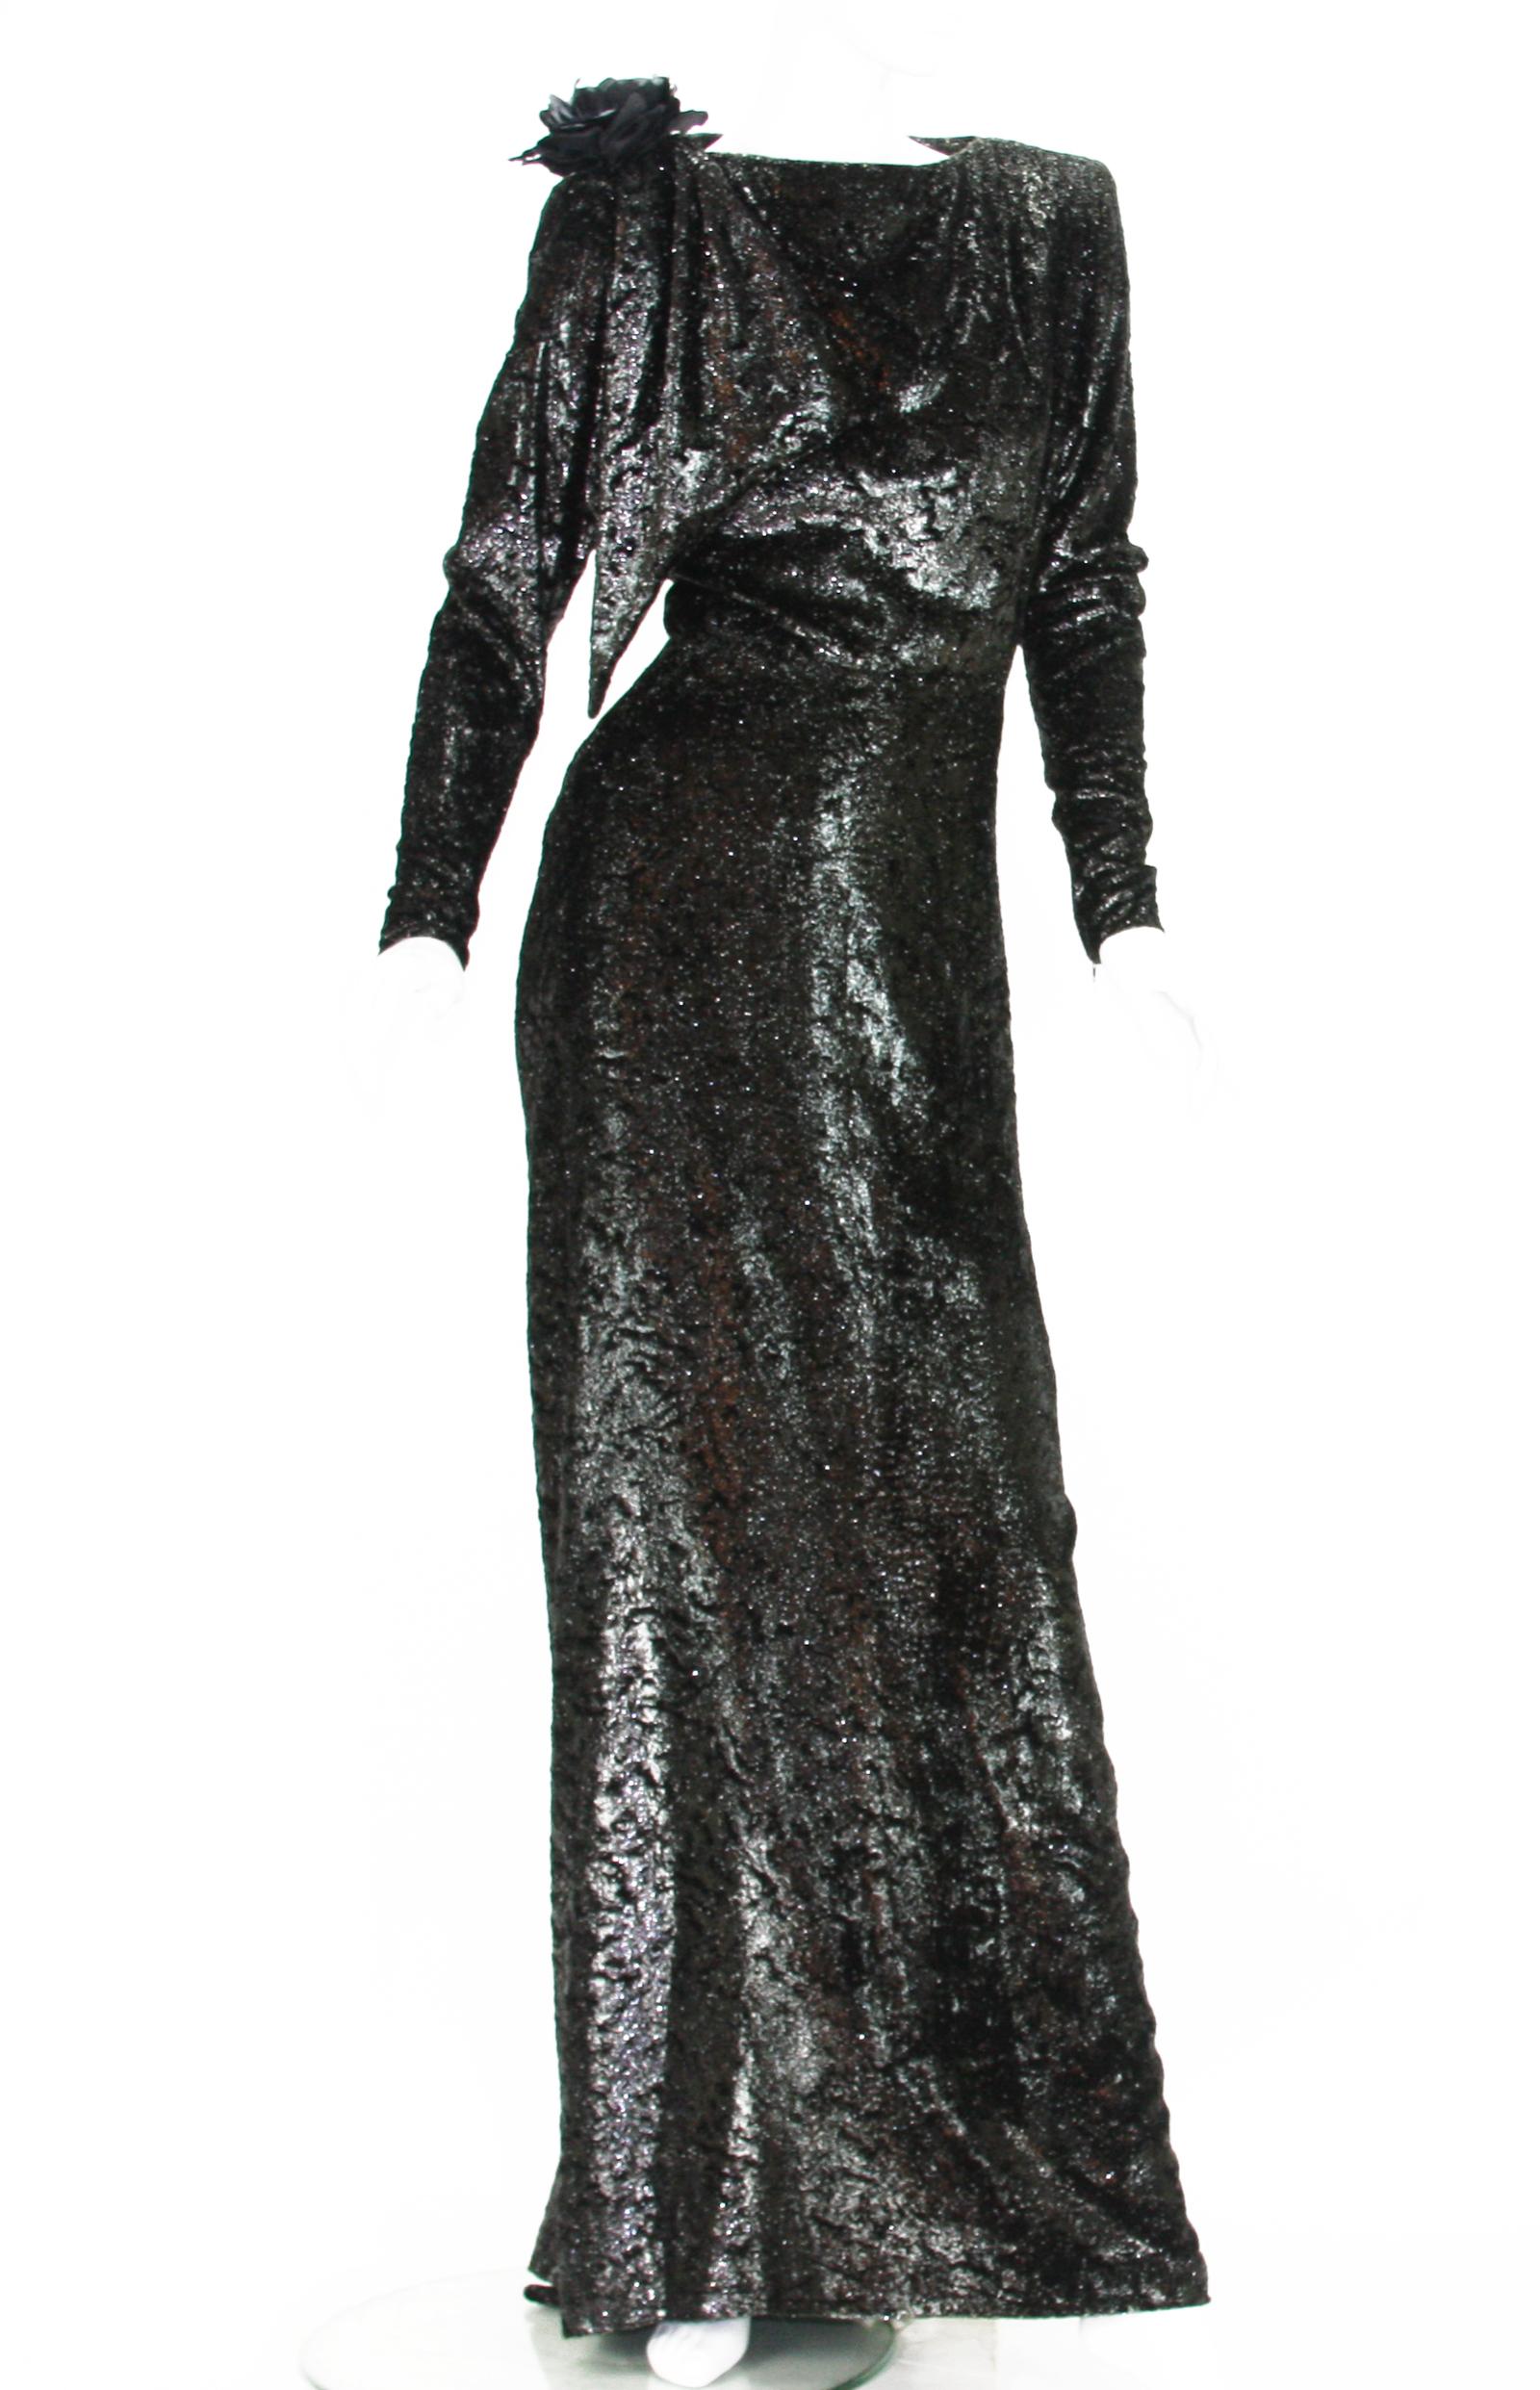 Rare 2 in 1 Yves Saint Laurent Couture Crushed Velvet Numbered Dress c. 1986 In New Condition For Sale In Montgomery, TX